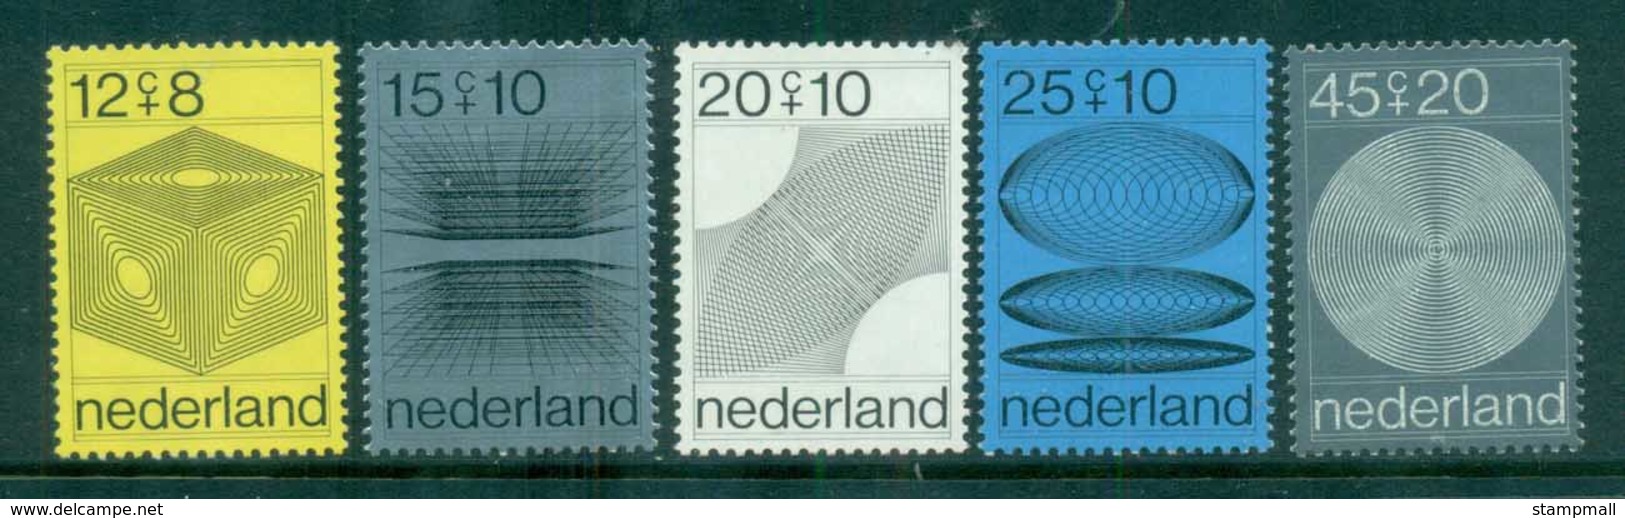 Netherlands 1970 Charity, Social & Cultural Purposes, Computer Designs MUH Lot76557 - Unclassified